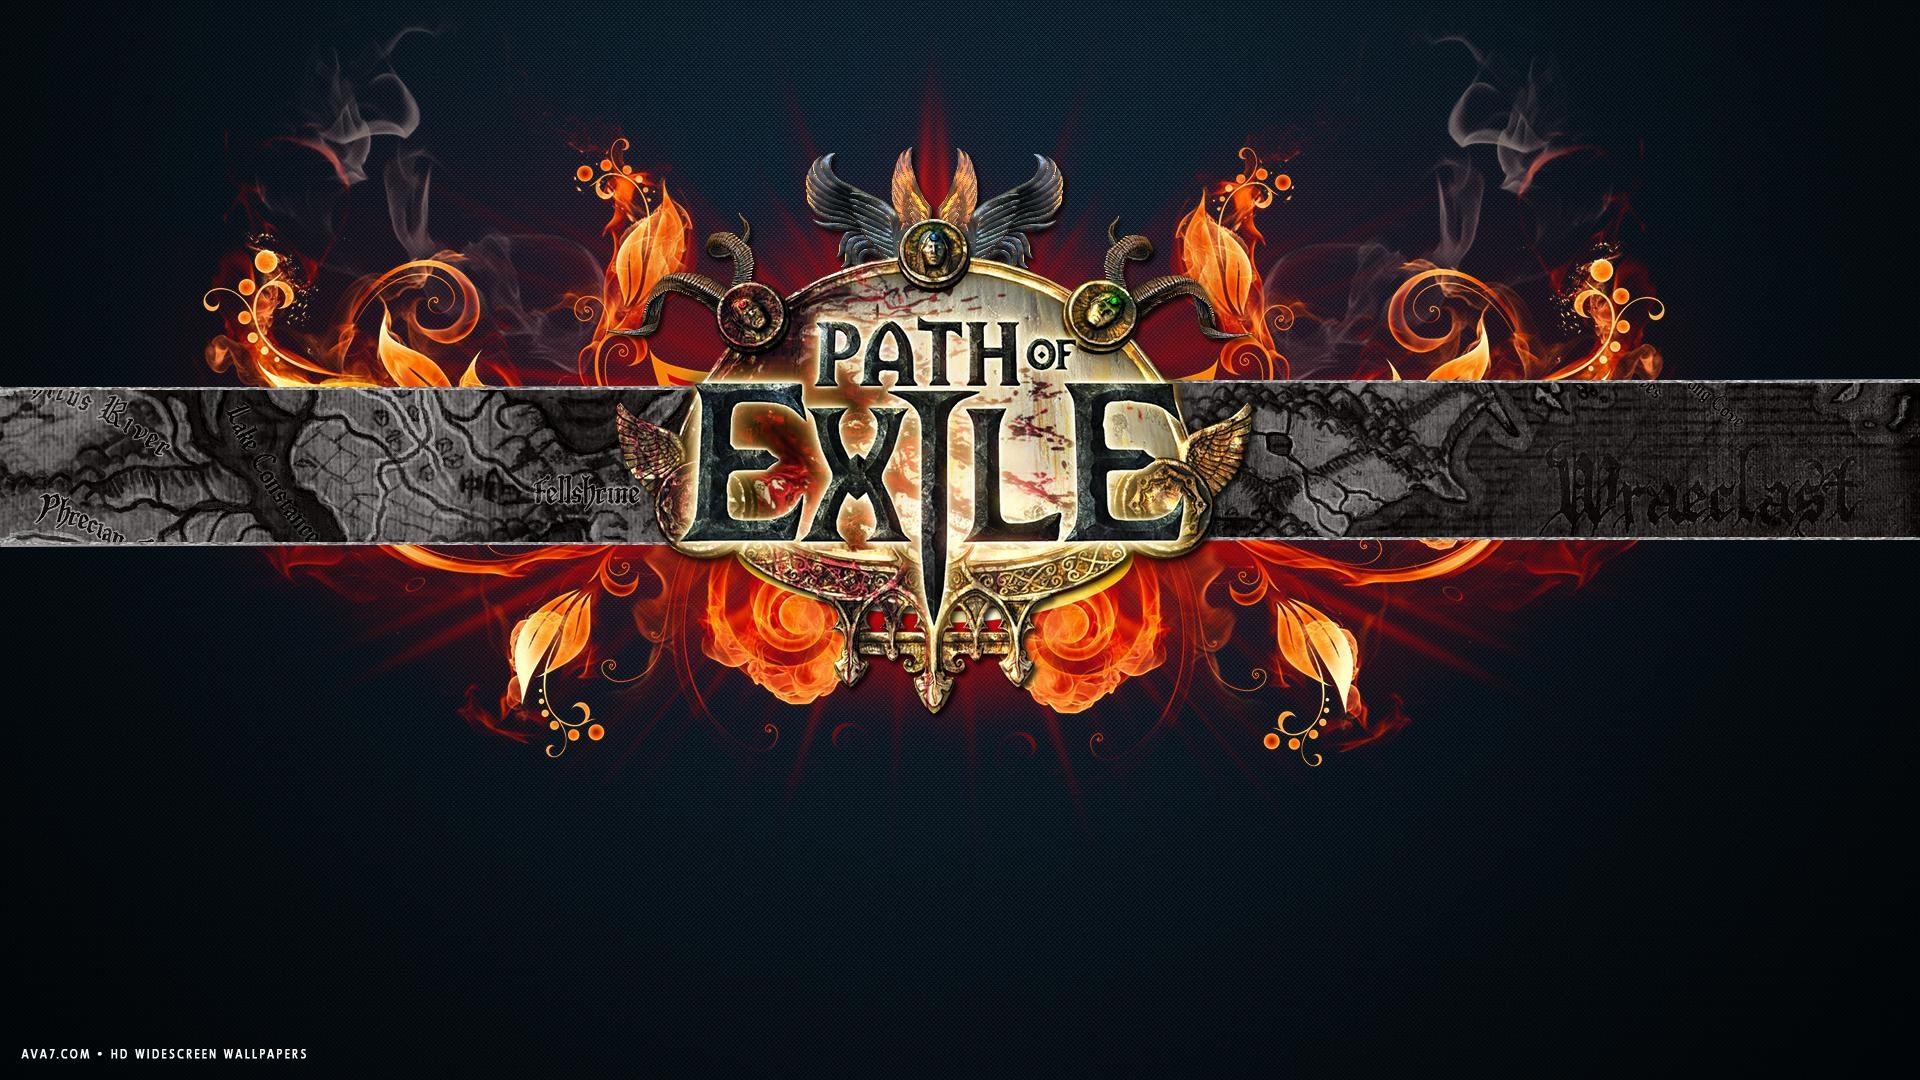 path of exile game HD widescreen wallpaper / games background